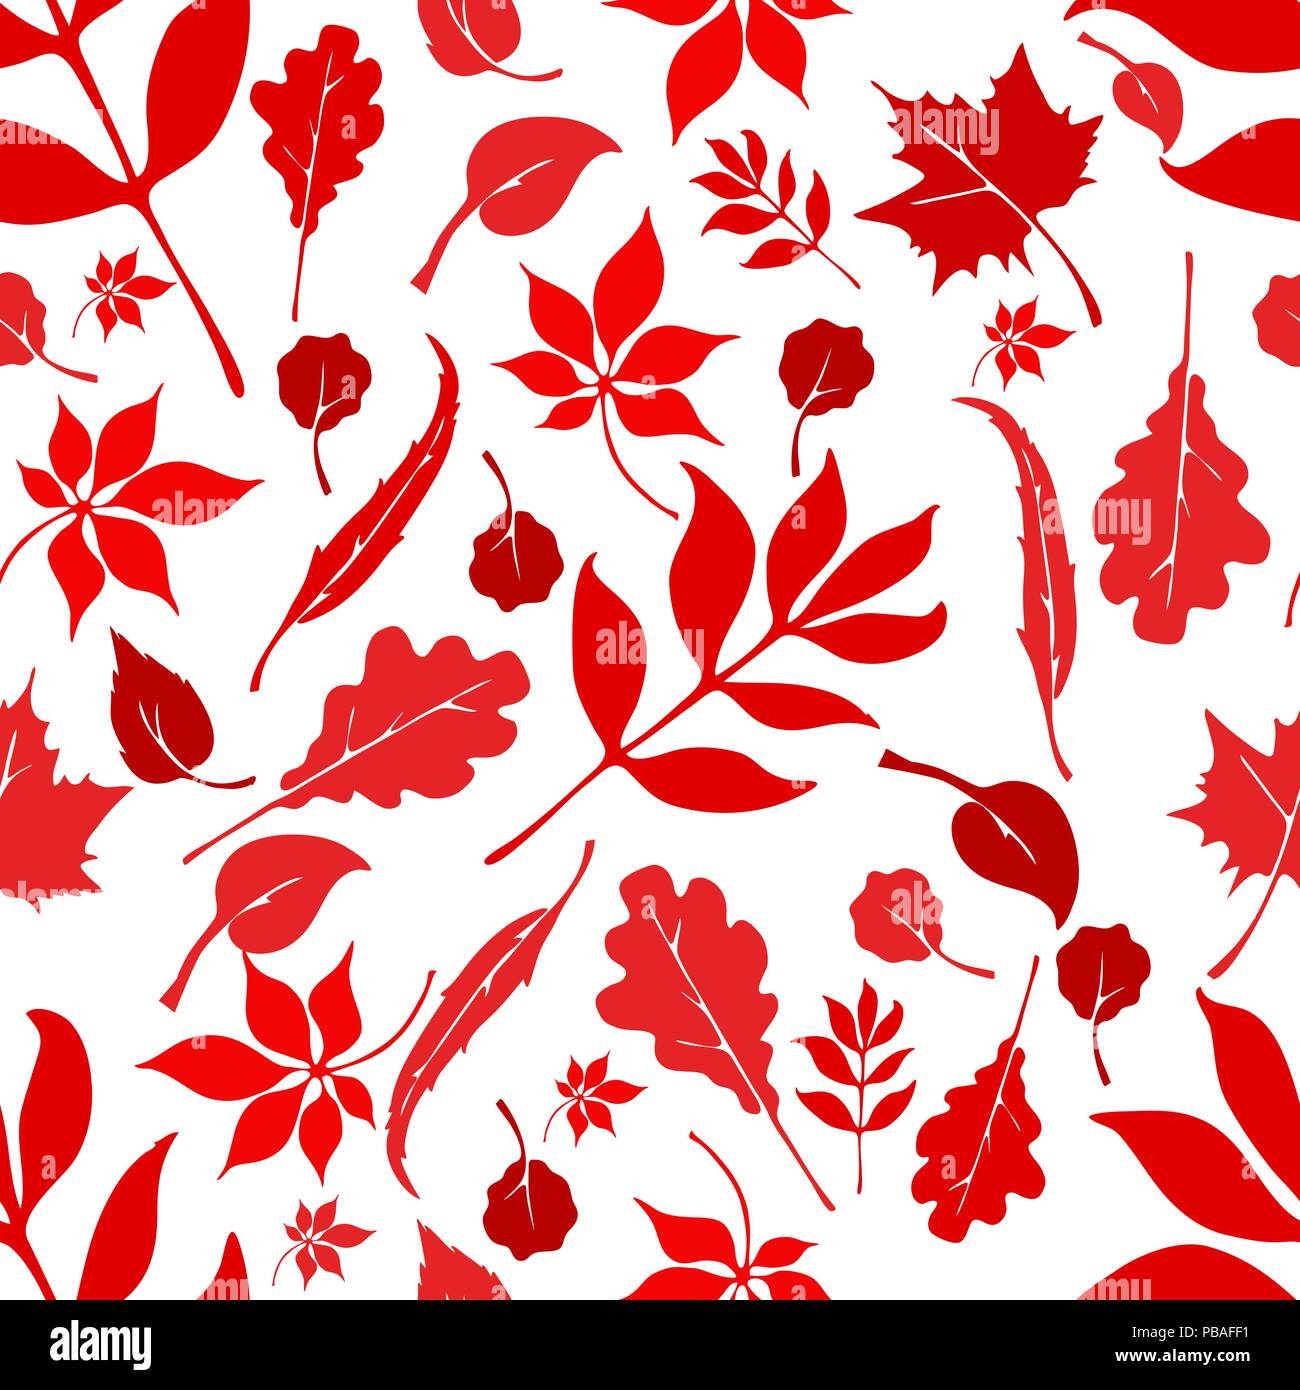 Russian forest seamless pattern. Red and white fabric.  European trees design. Oak, linden, birch, chestnut, willow, alder, ash, maple leaves. Vector  Stock Vector